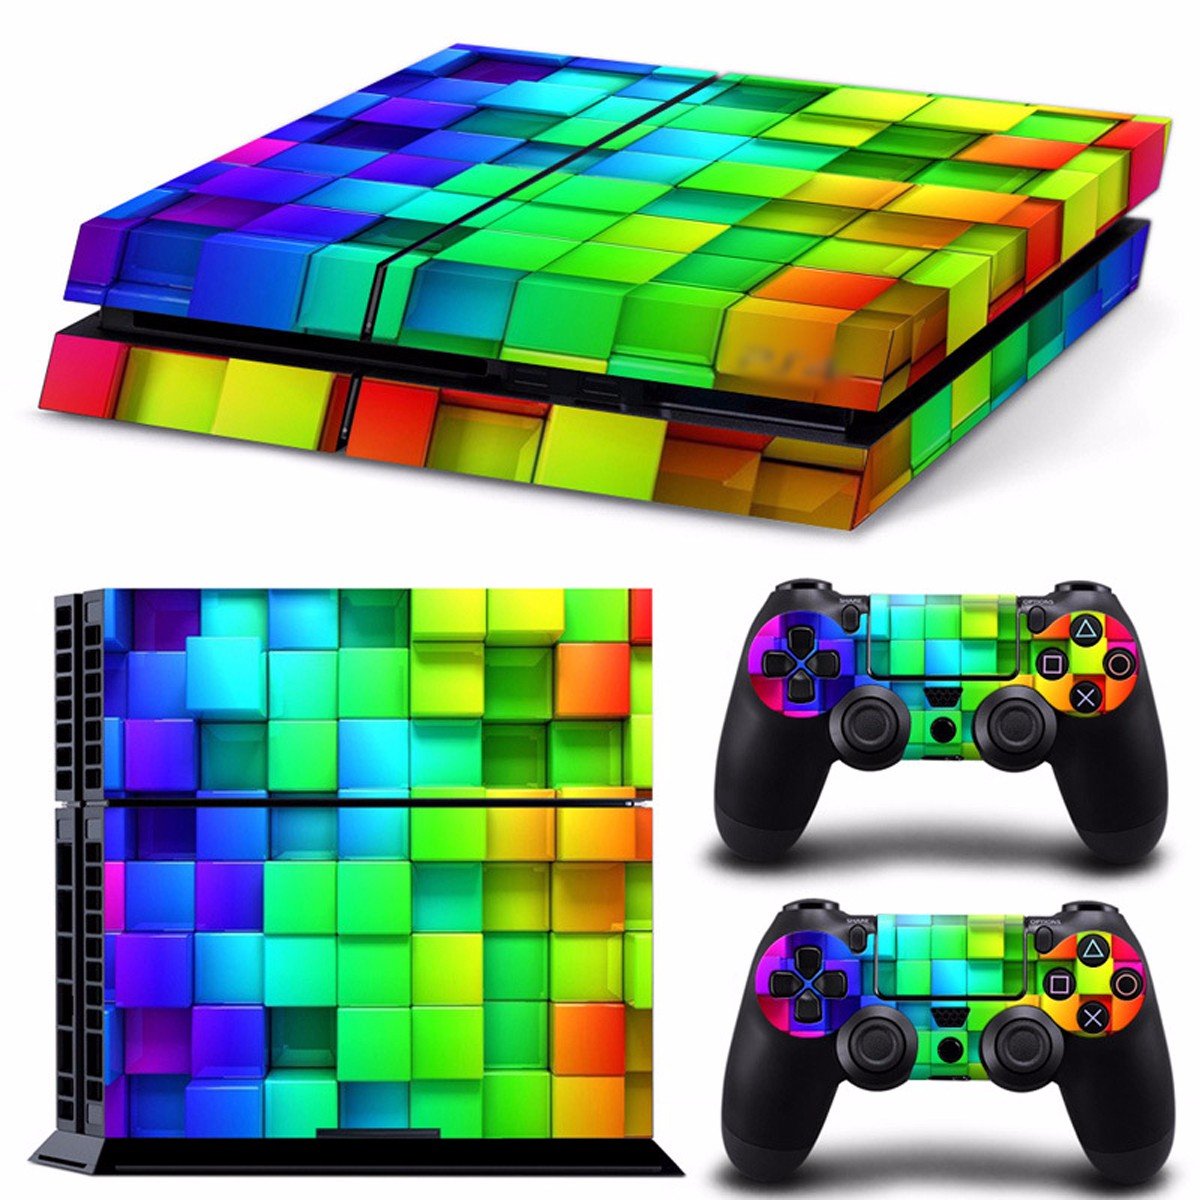 Lattice Style Vinyl Skin Decal For PS4 Play Station 4 Console and 2 Controllers 1